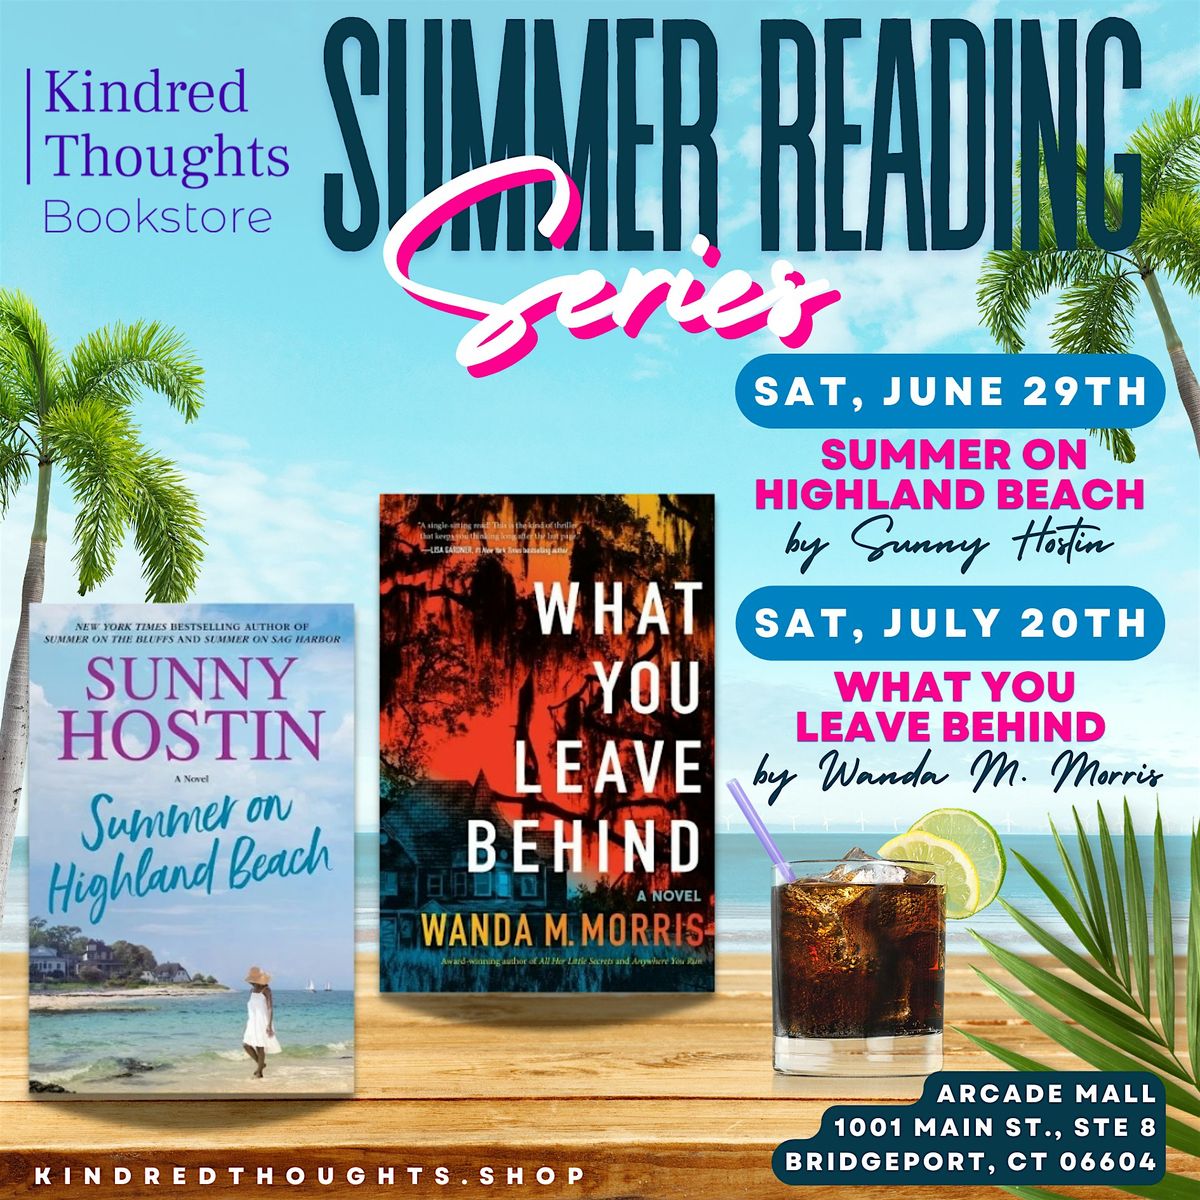 Kindred Thoughts Bookstore 2nd Annual Summer Reading Series